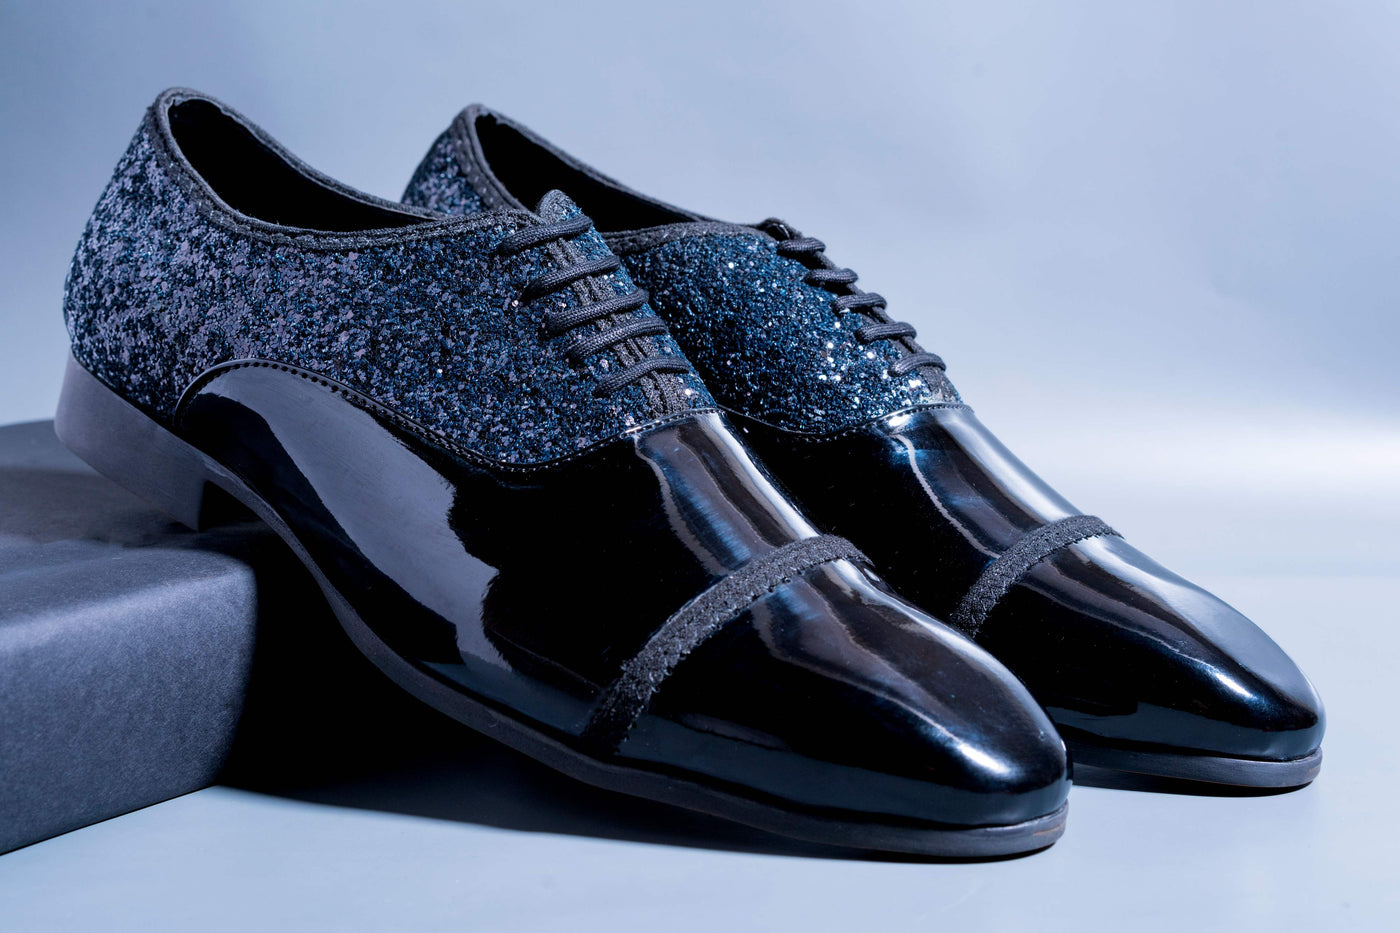 Most Stylish Black Party Wear Premium Quality Formal Shoes-Unique and Classy